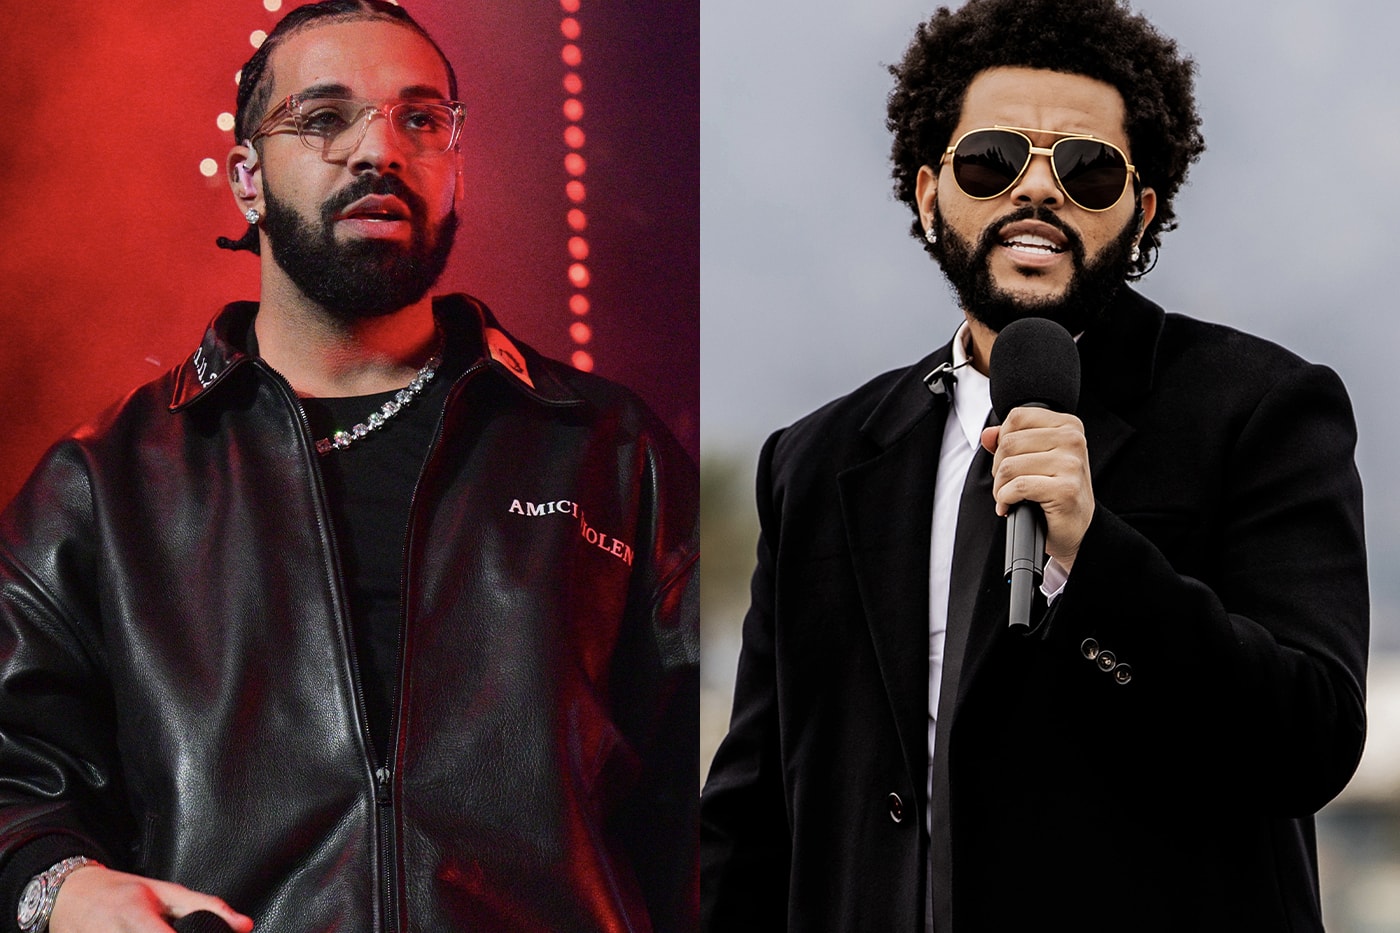 Drake The Weeknd viral AI Song Removed From Streaming Universal Music Group statement